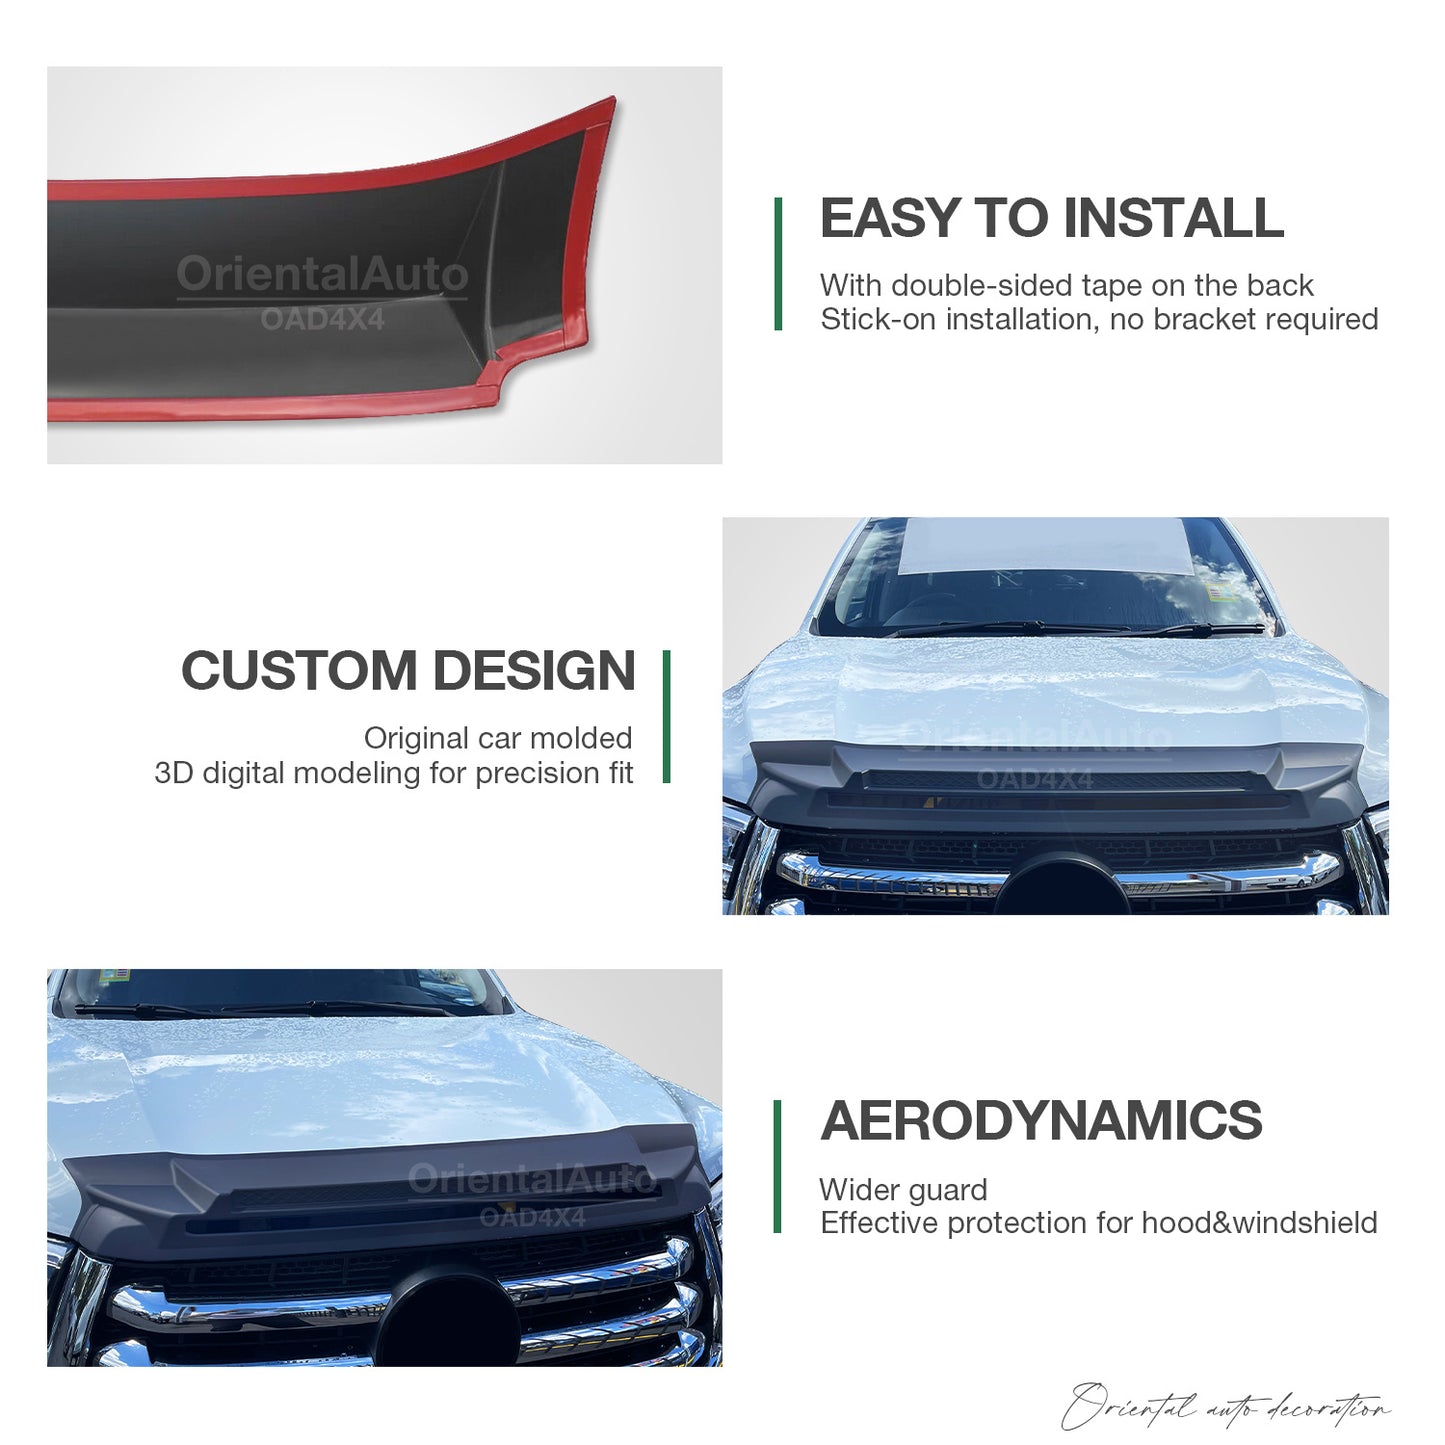 Injection Modeling Bonnet Protector & Injection Weathershields for GWM Cannon Weather Shields Window Visor + Hood Protector Guard